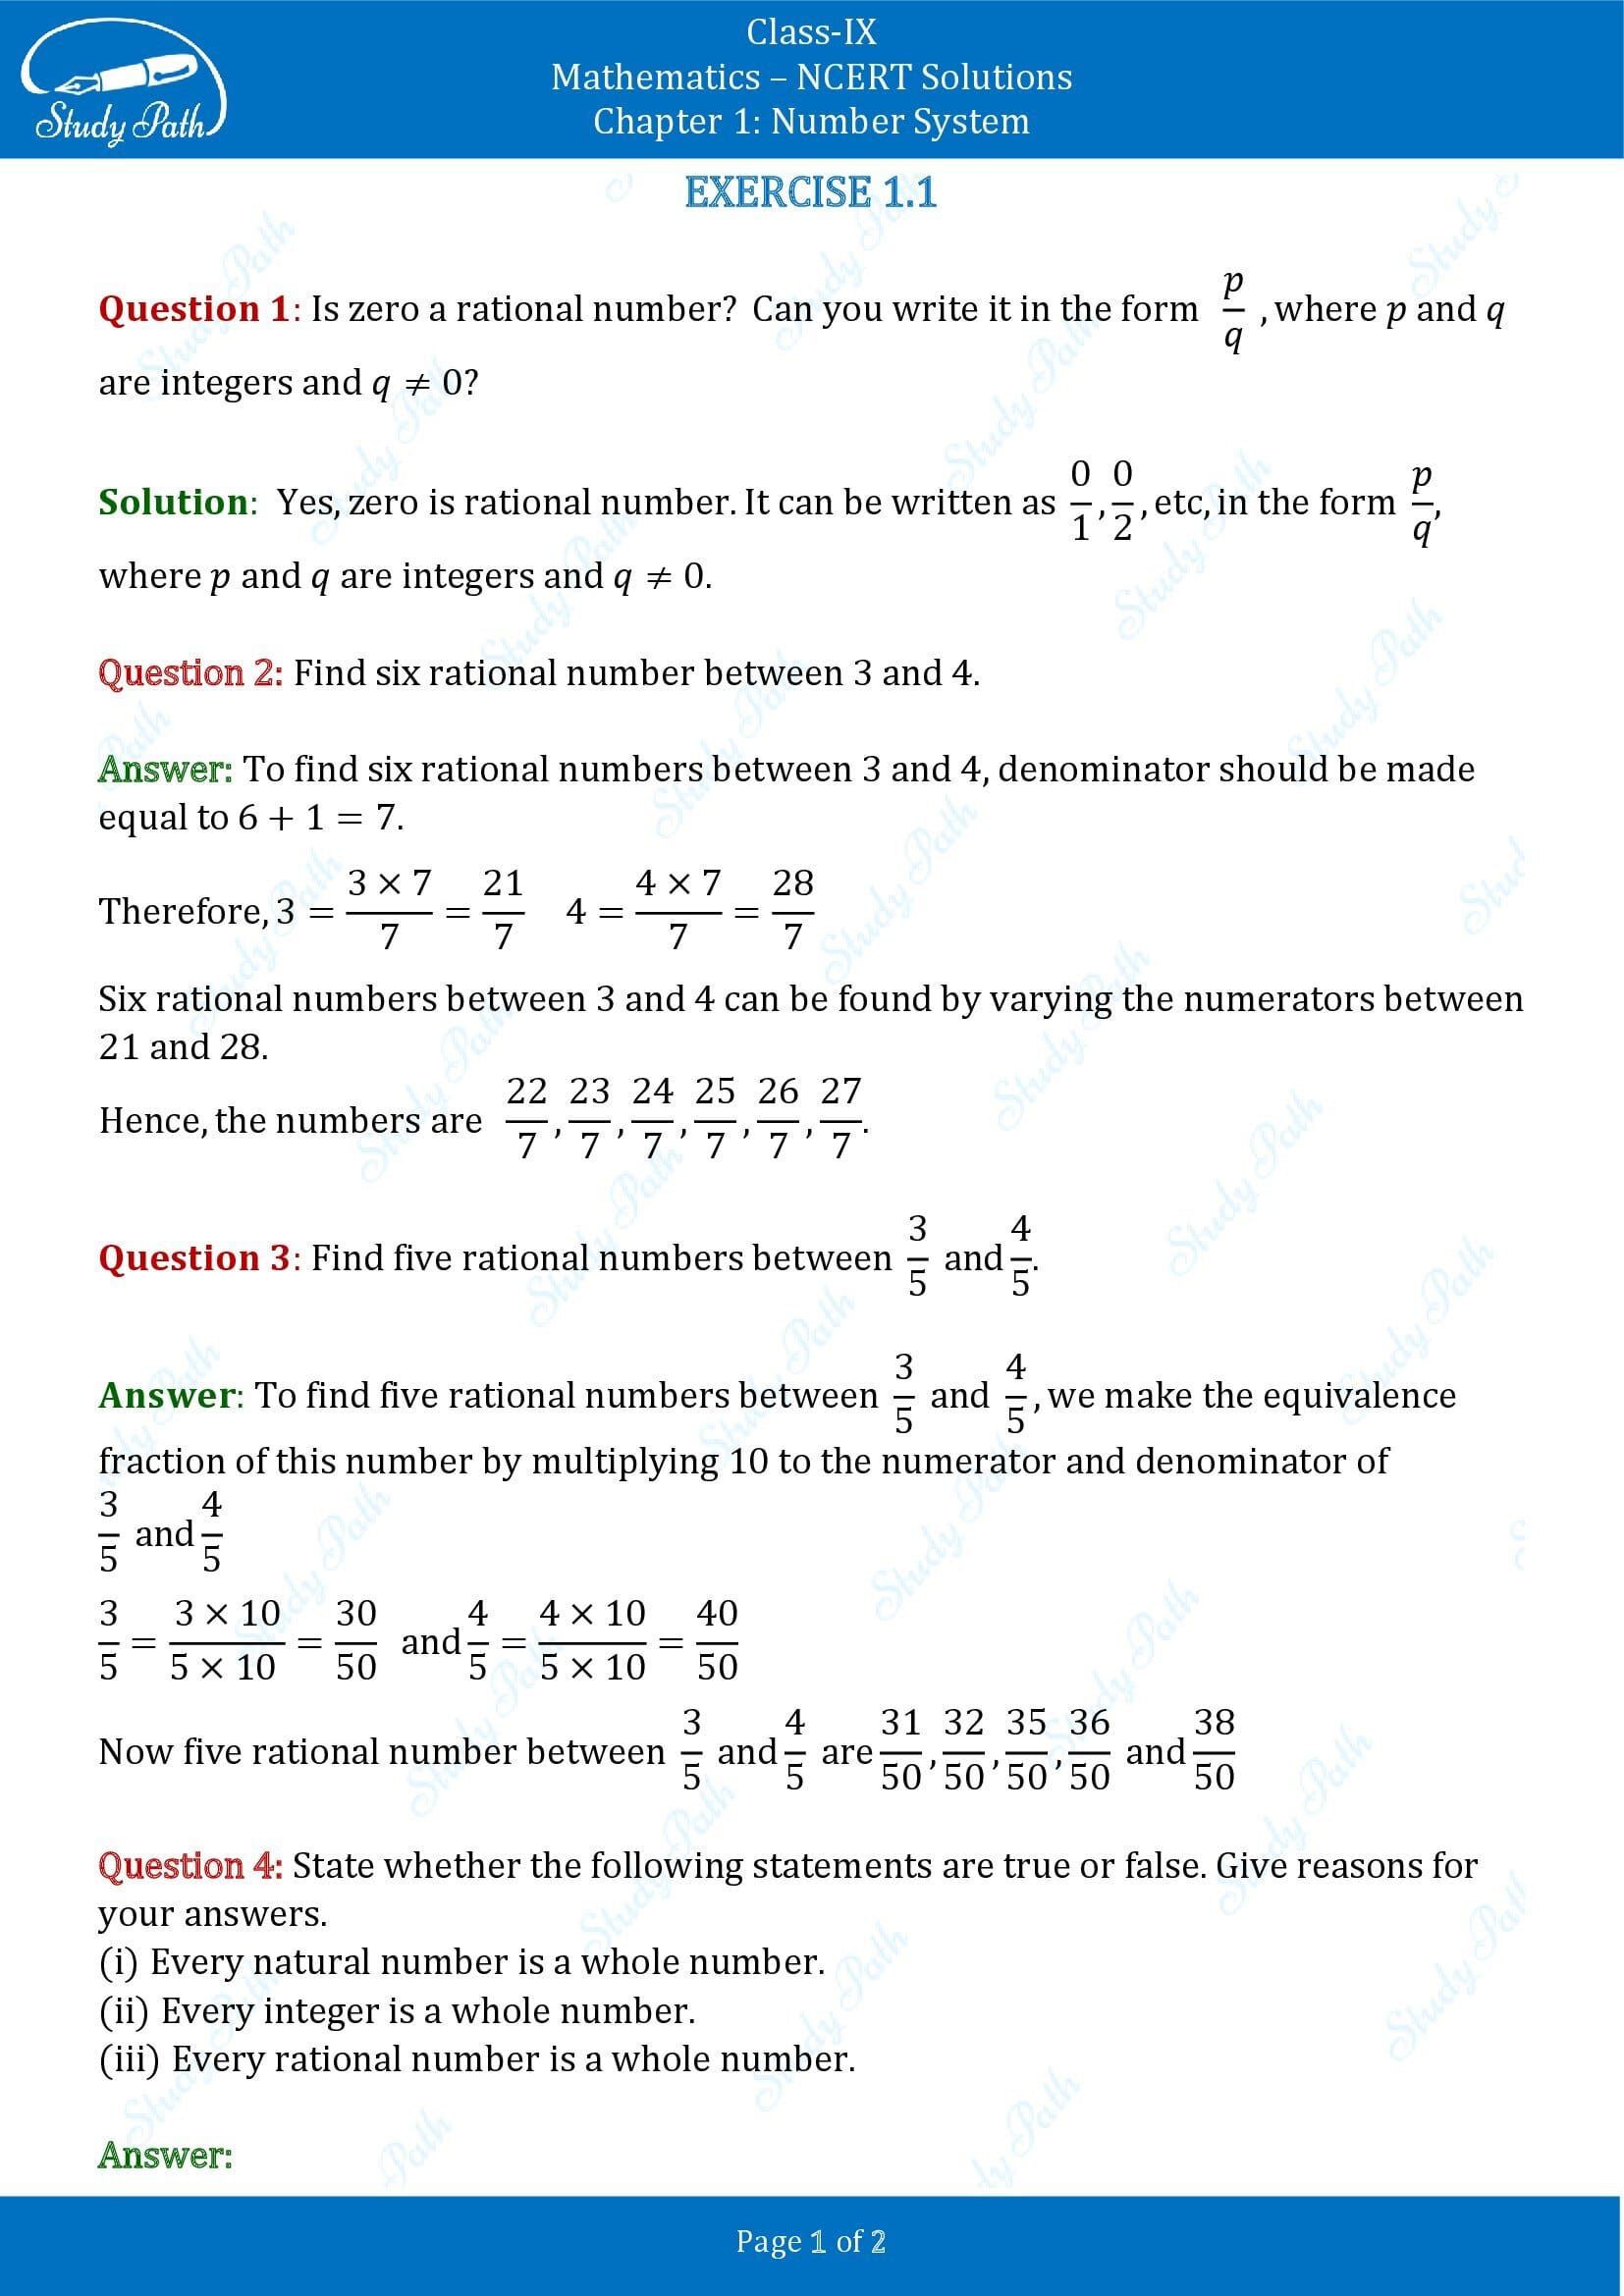 NCERT Solutions for Class 9 Maths Chapter 1 Number System Exercise 1.1 00001